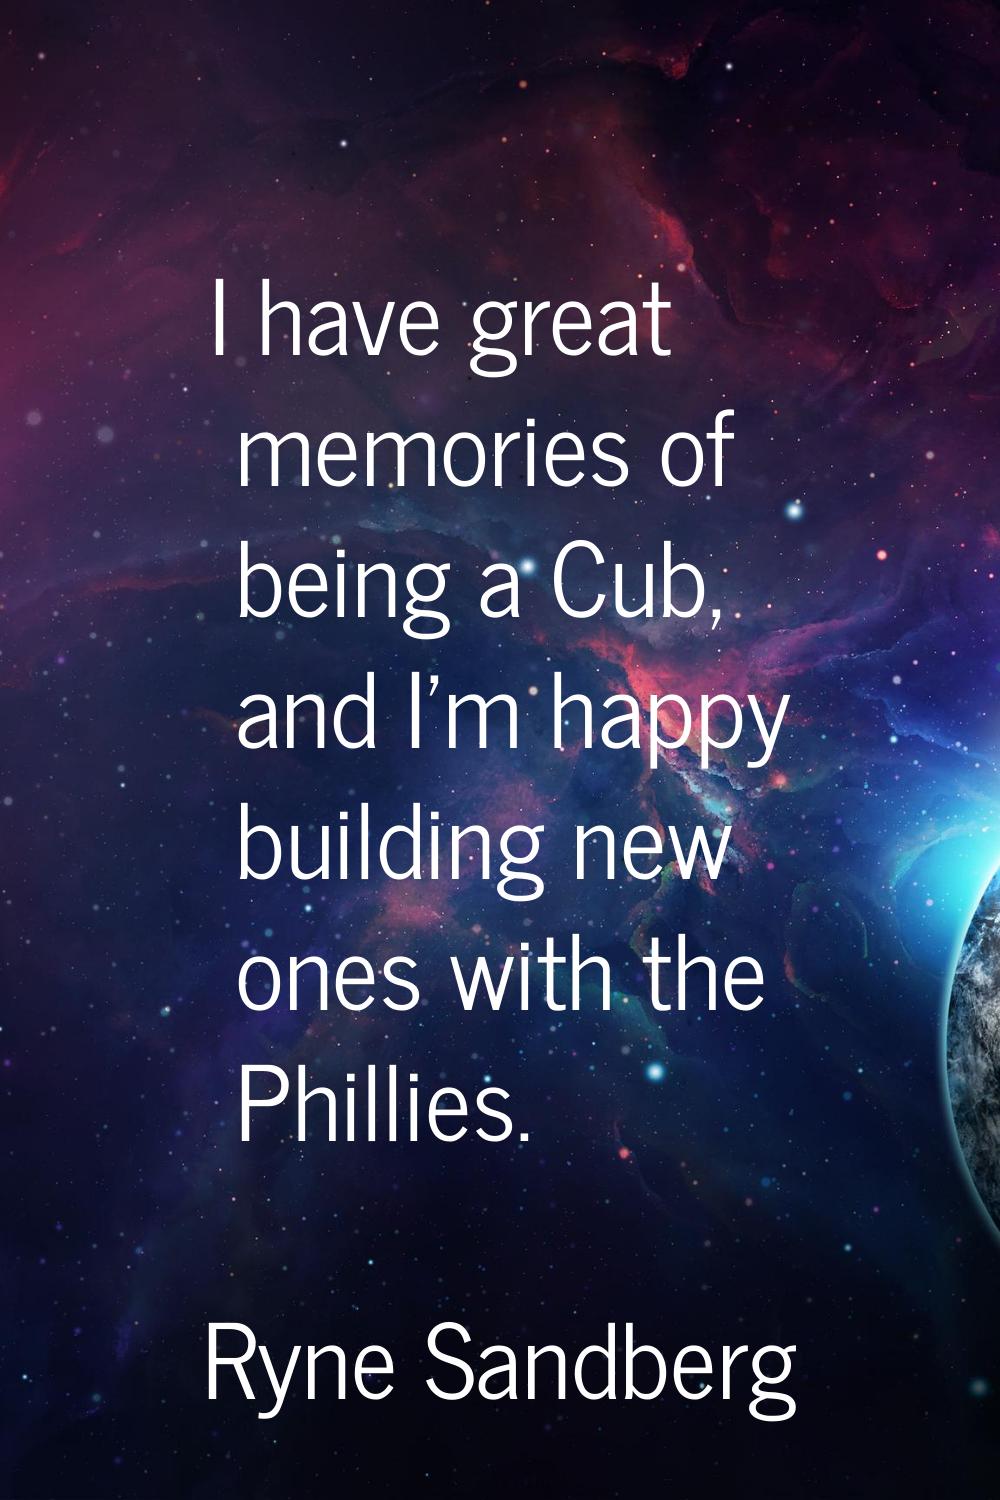 I have great memories of being a Cub, and I'm happy building new ones with the Phillies.